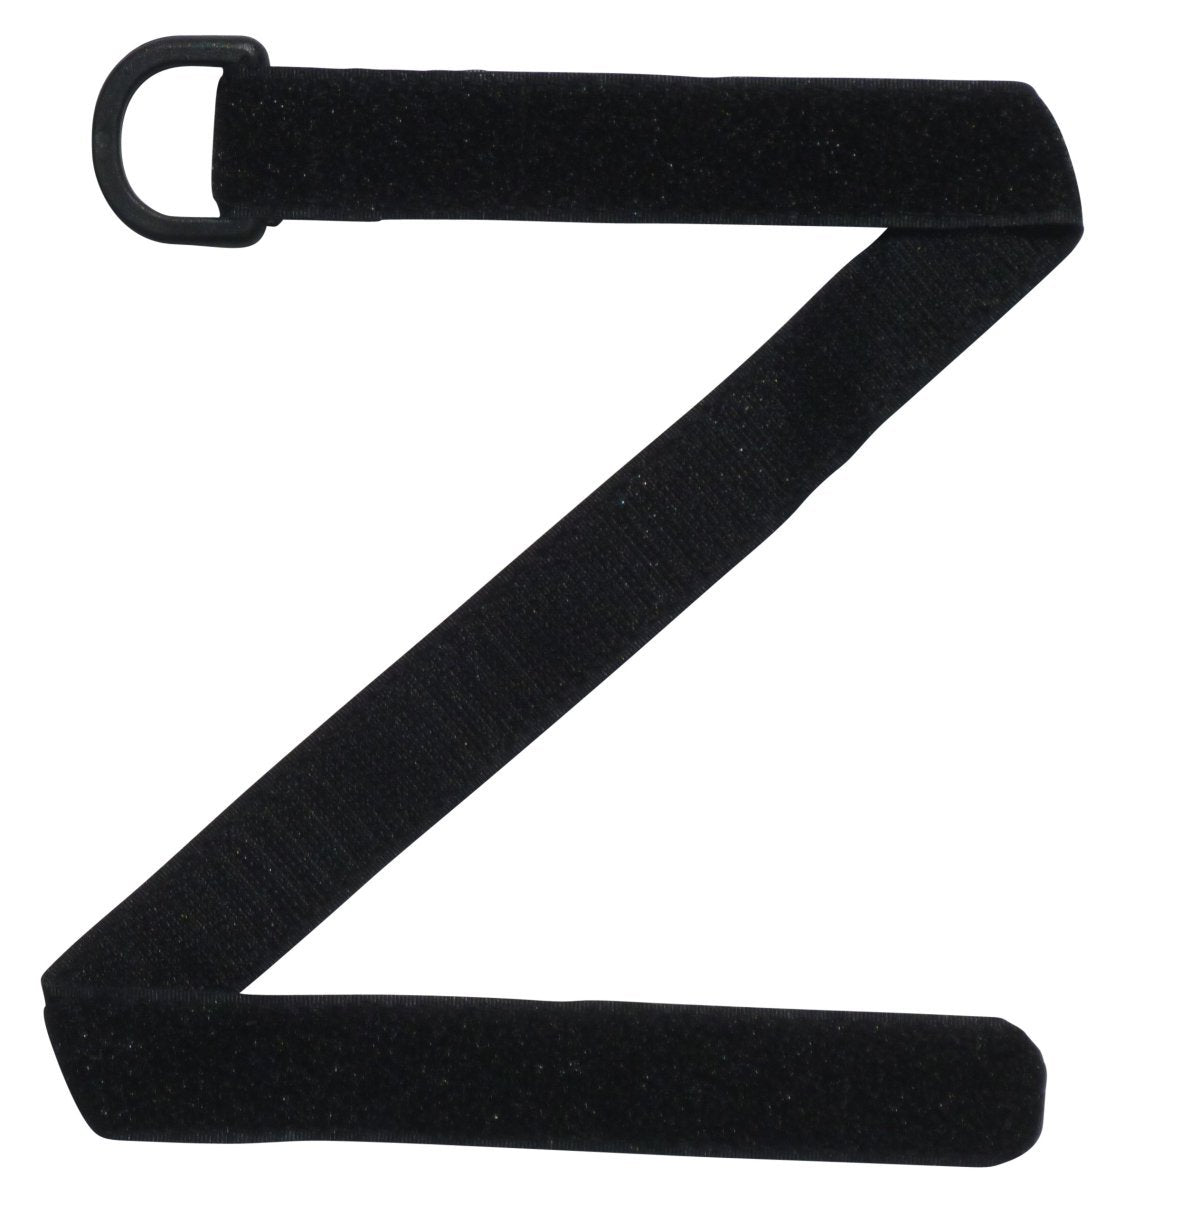 Benristraps 25mm Hook and Loop Strap with D Ring (Pair) in black